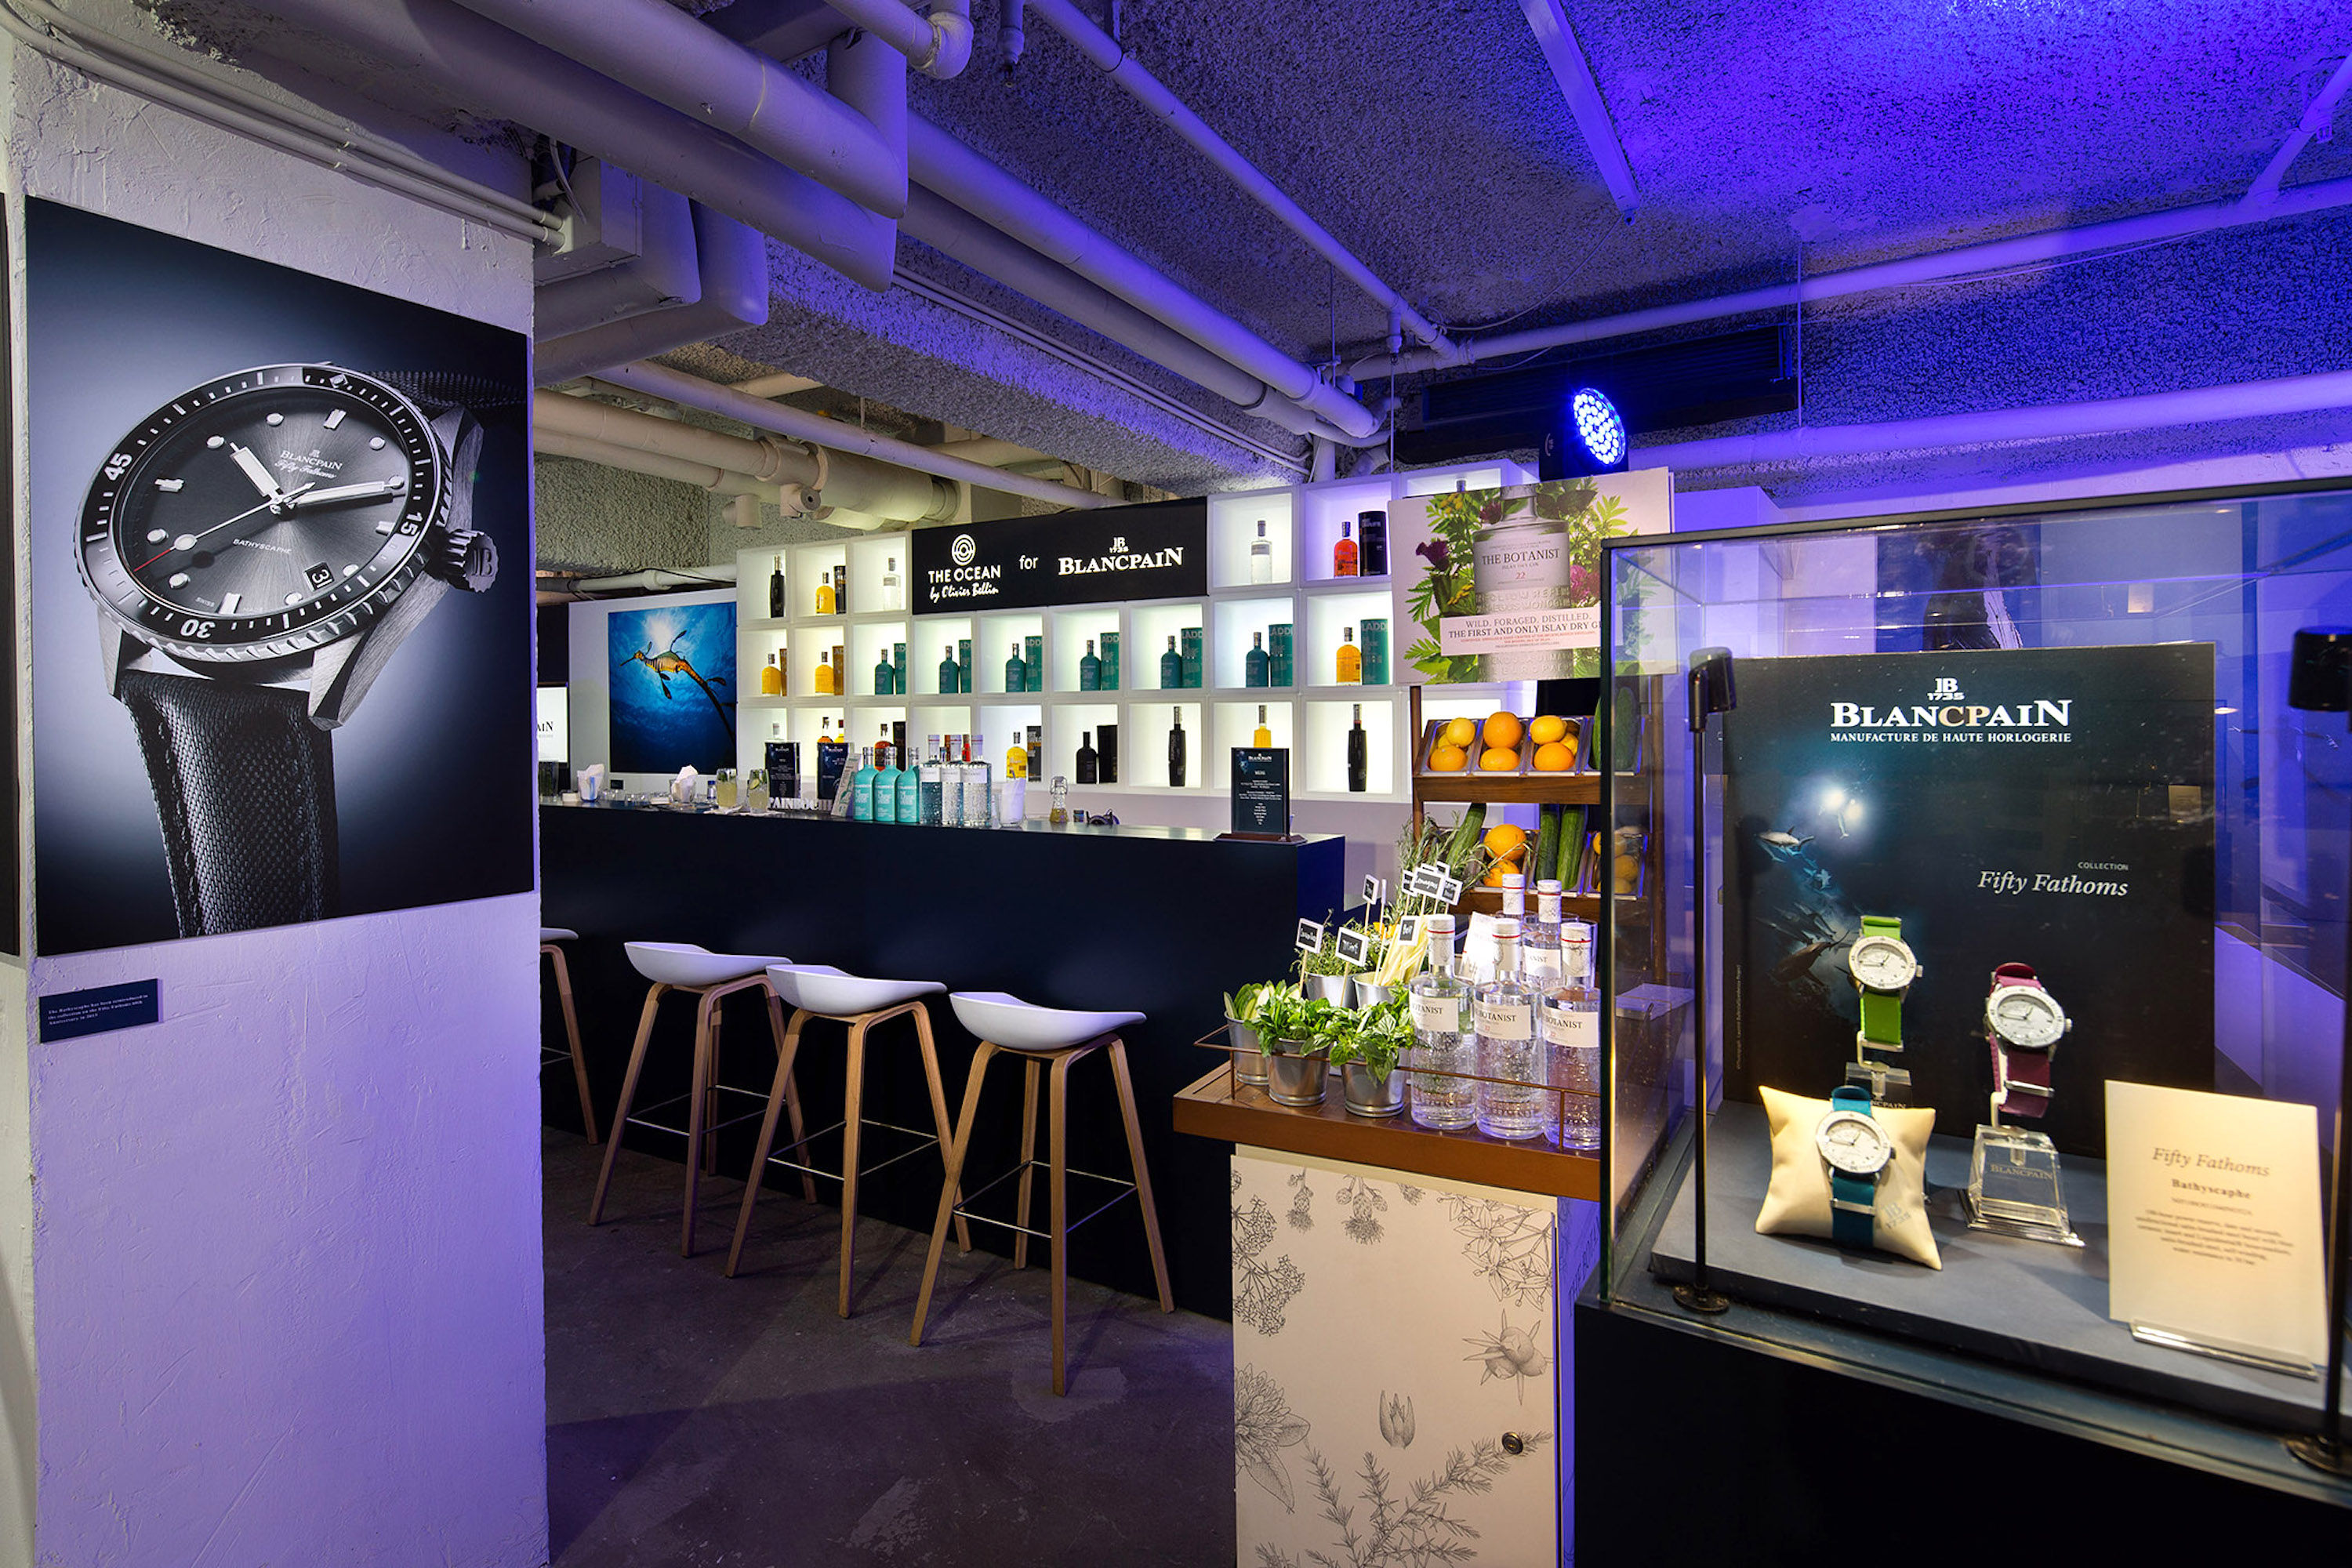 Blancpain’s pop-up celebrates marine protection and an iconic anniversary